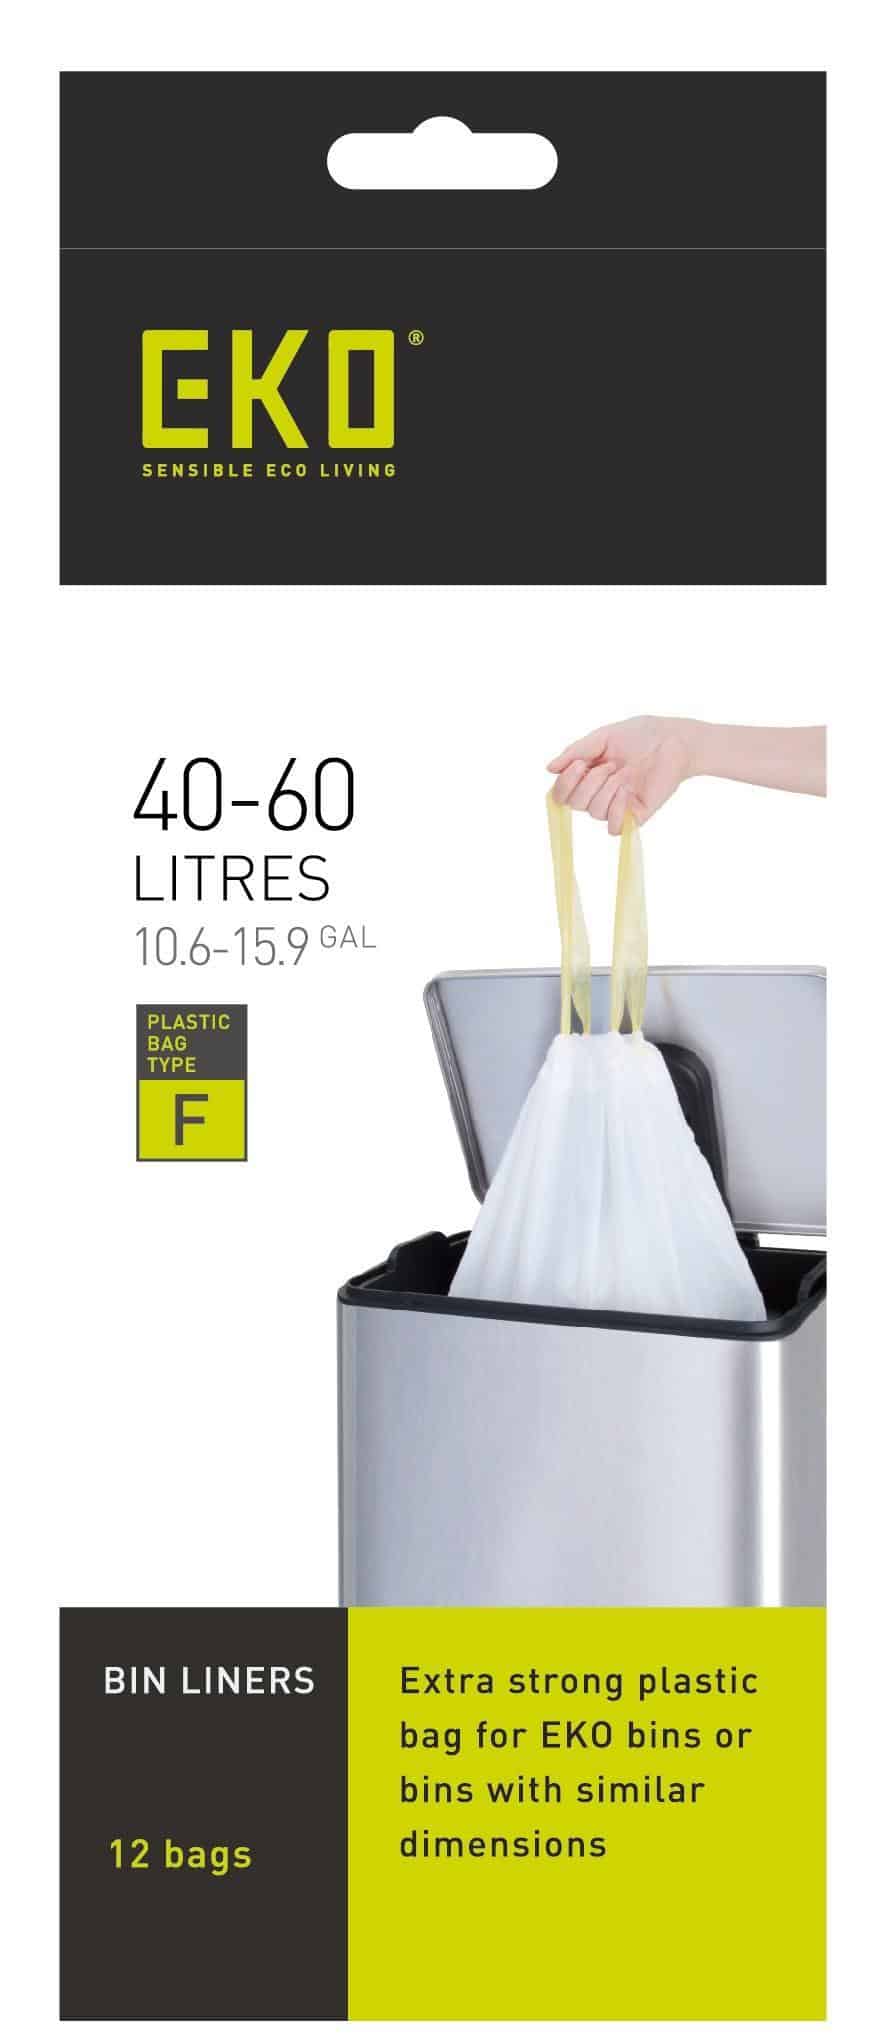 SIZE F BIN LINERS 40-60L 12 BAGS Extra strong liners EKO Home LIMITED - UK 